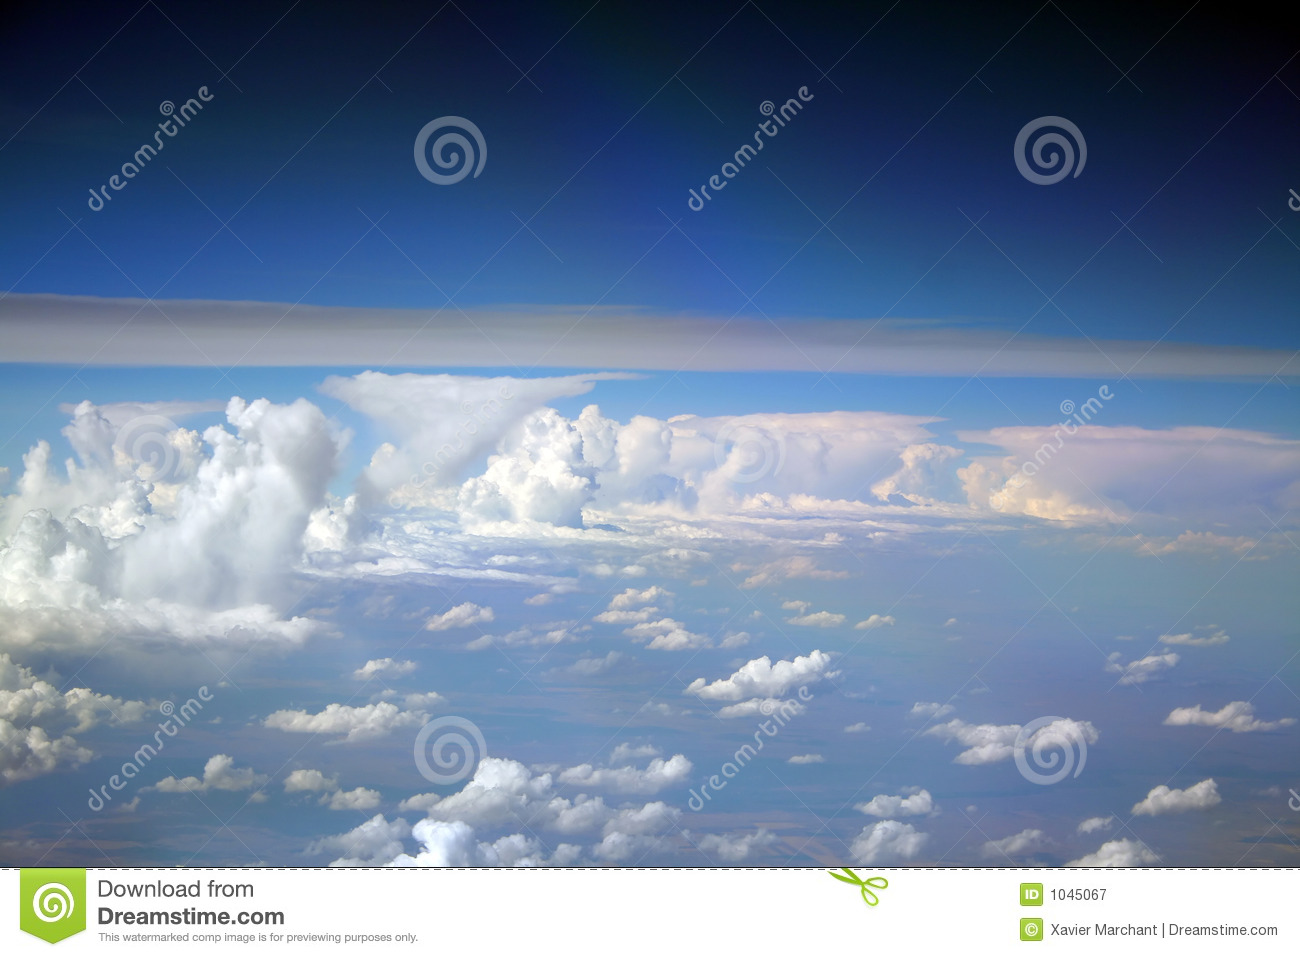 Squall Line Royalty Free Stock Photography.